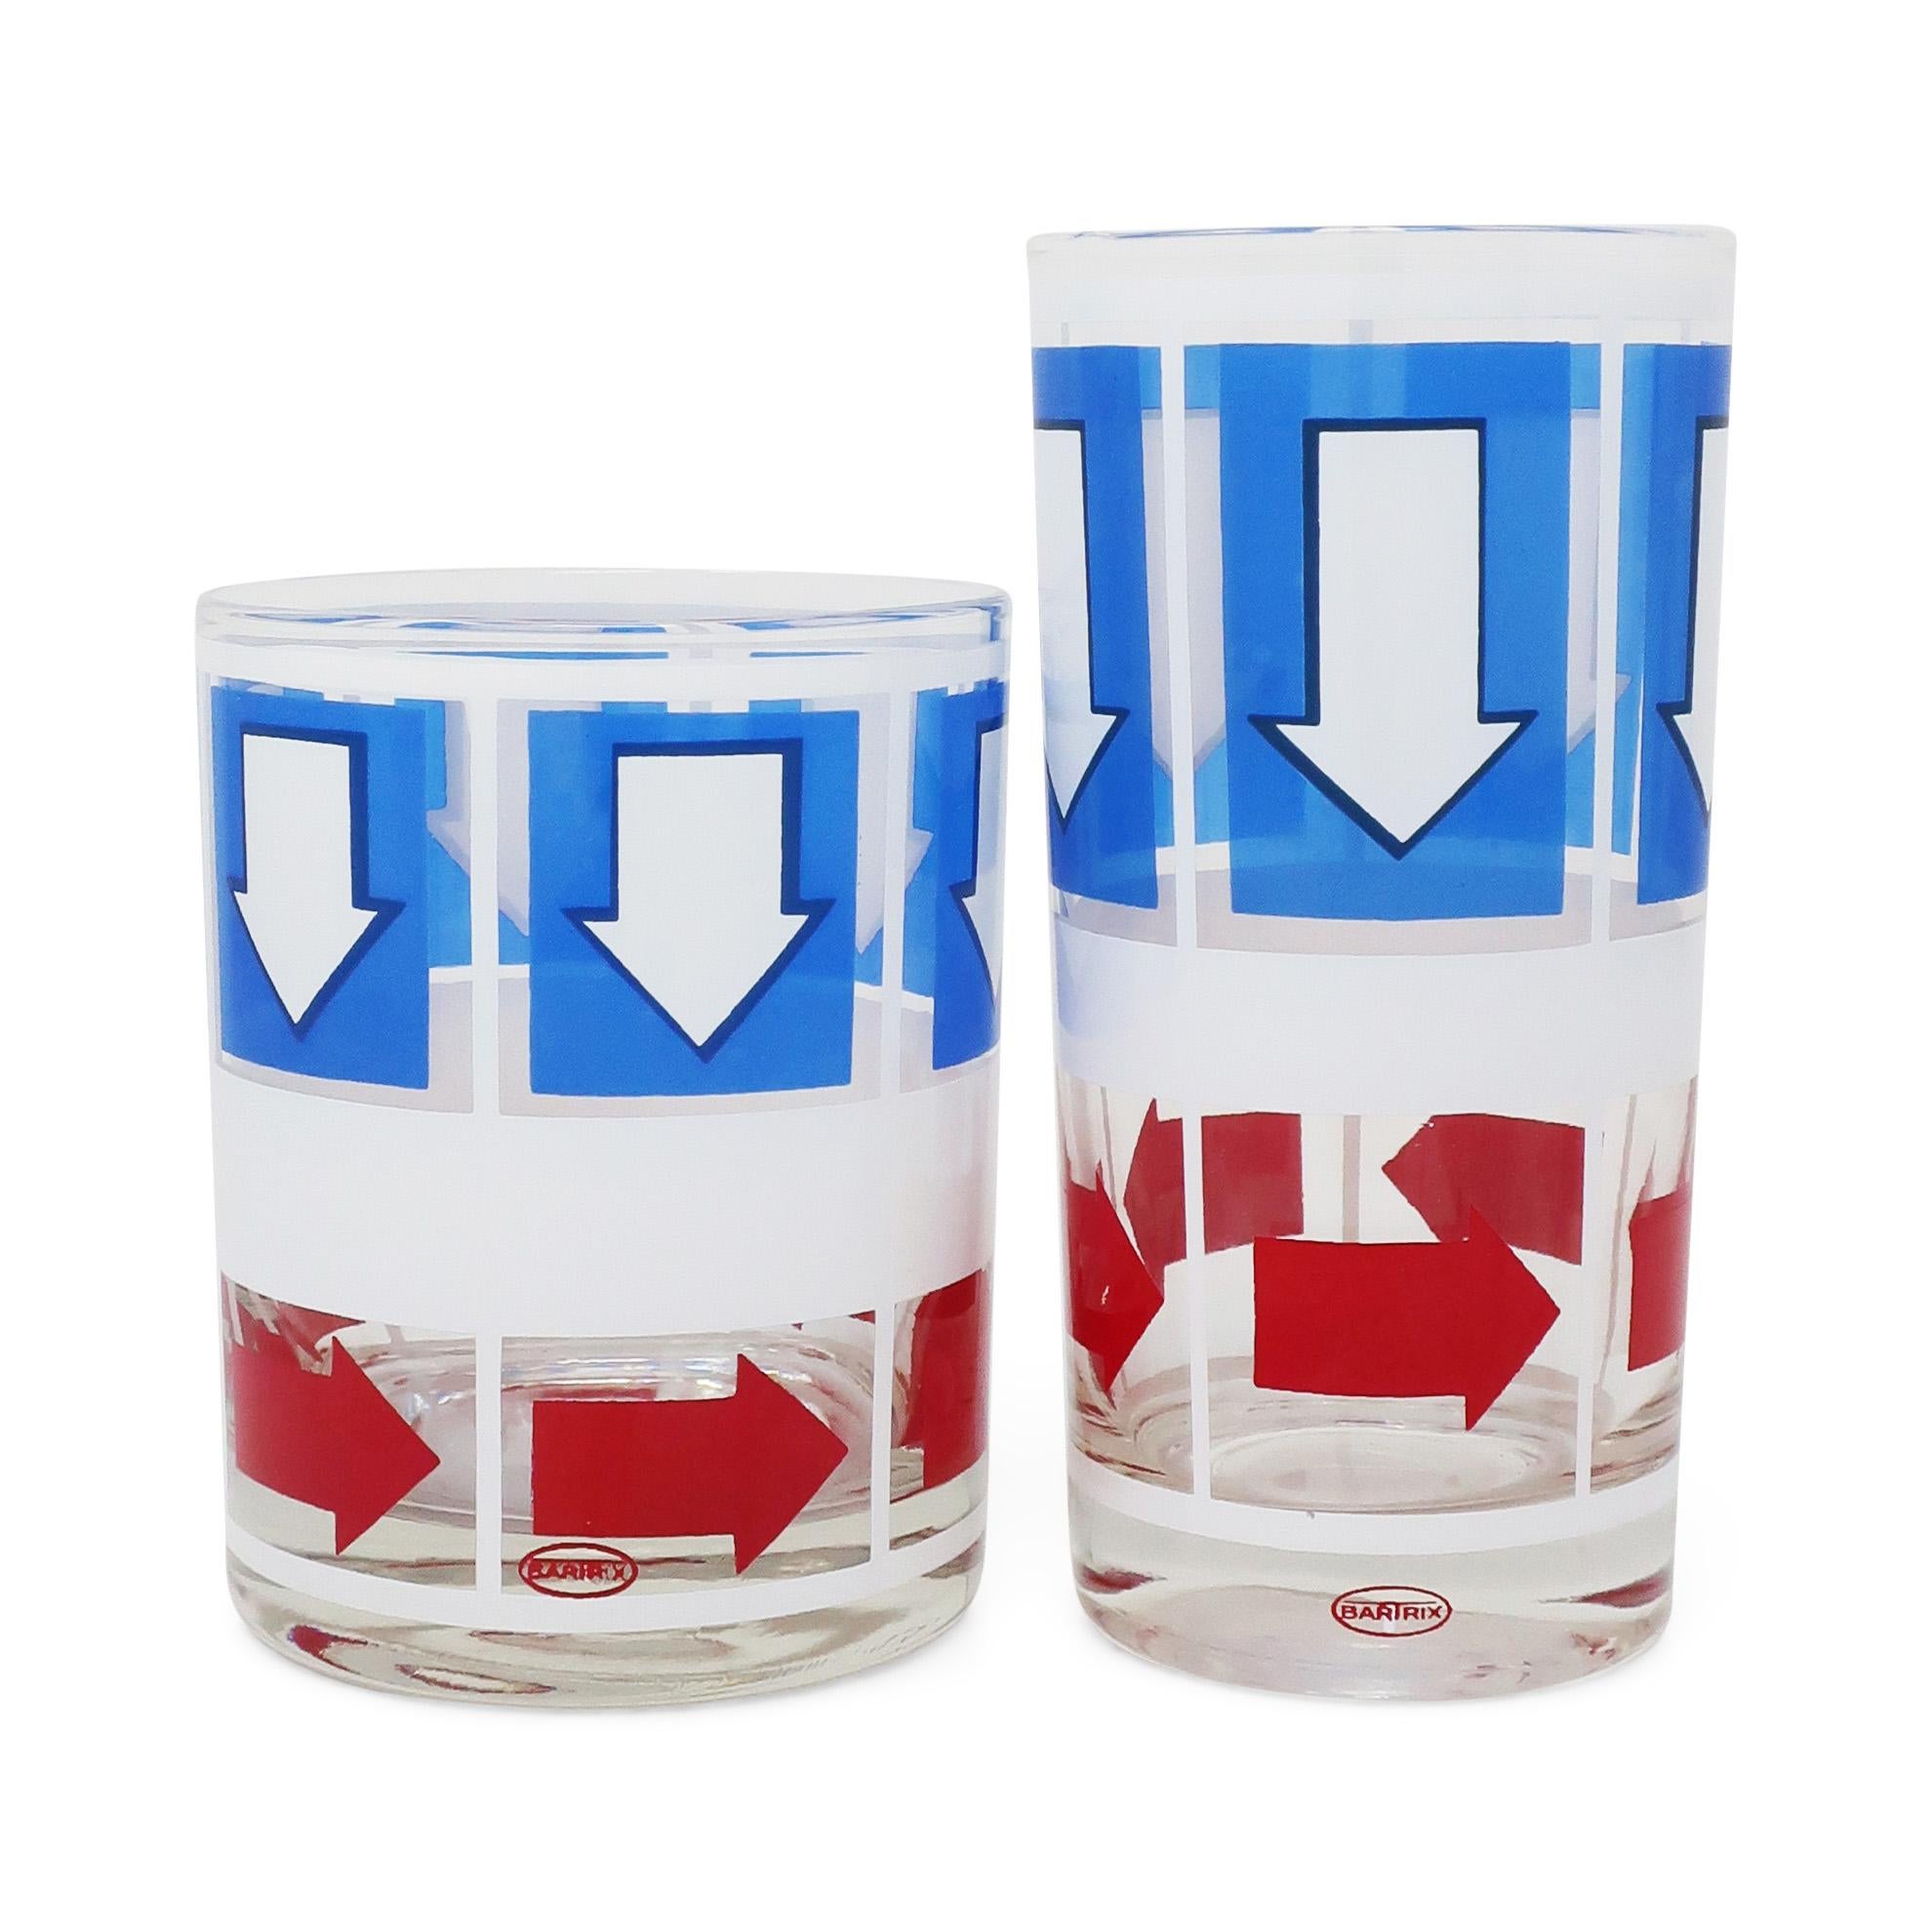 20th Century 1970s, Pop Art Red White & Blue Arrow Glasses by Bartrix/Cera Glass, Set of 16